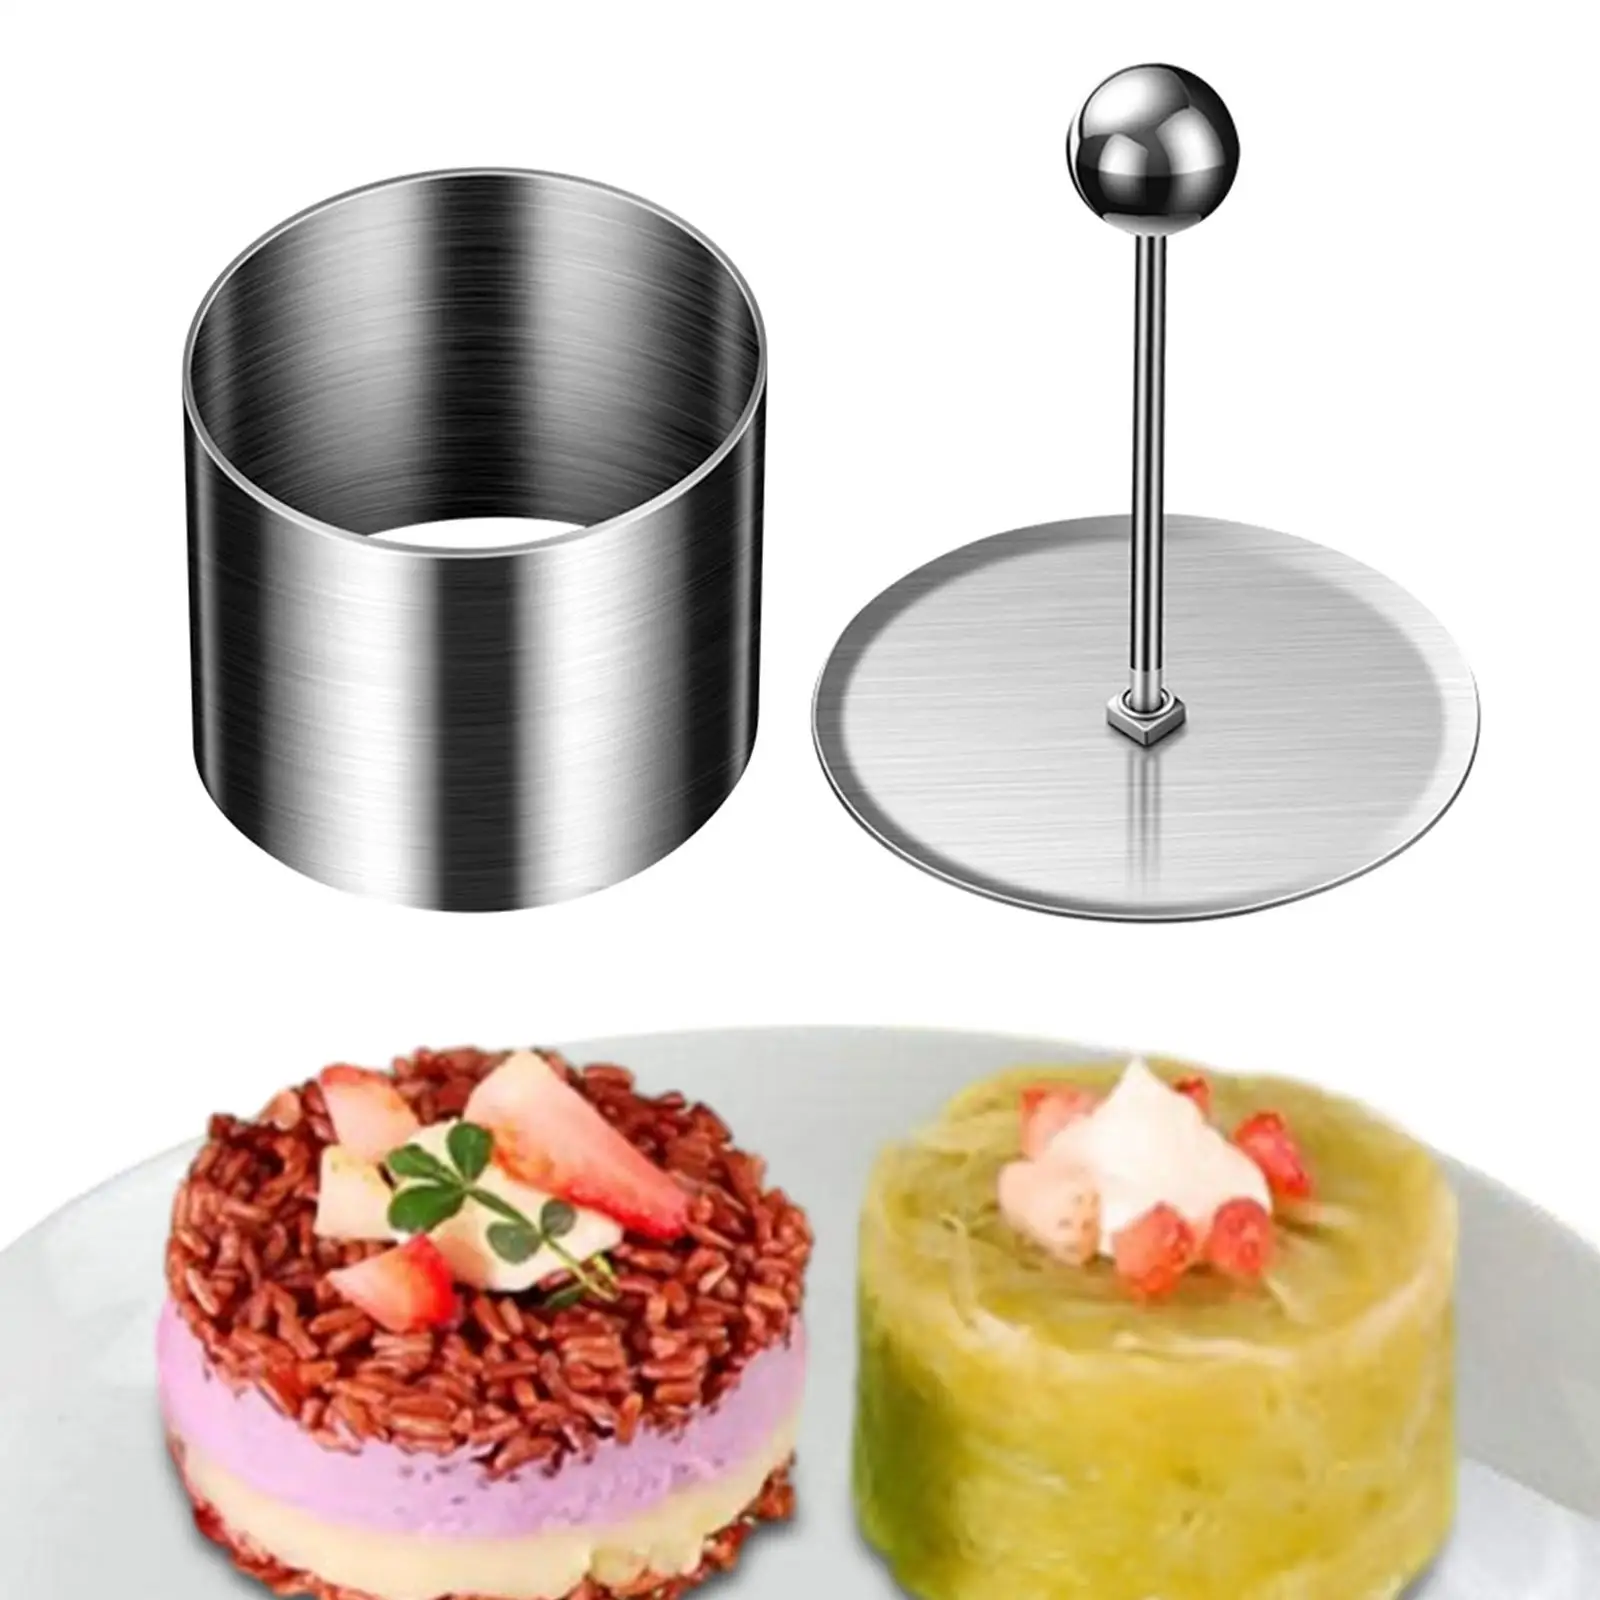 Stainless Steel Food Ring Cupcake Decorating Tools Pastry Rings Mini Baking Ring Maker for Mousse Scones Pie Bread Dessert